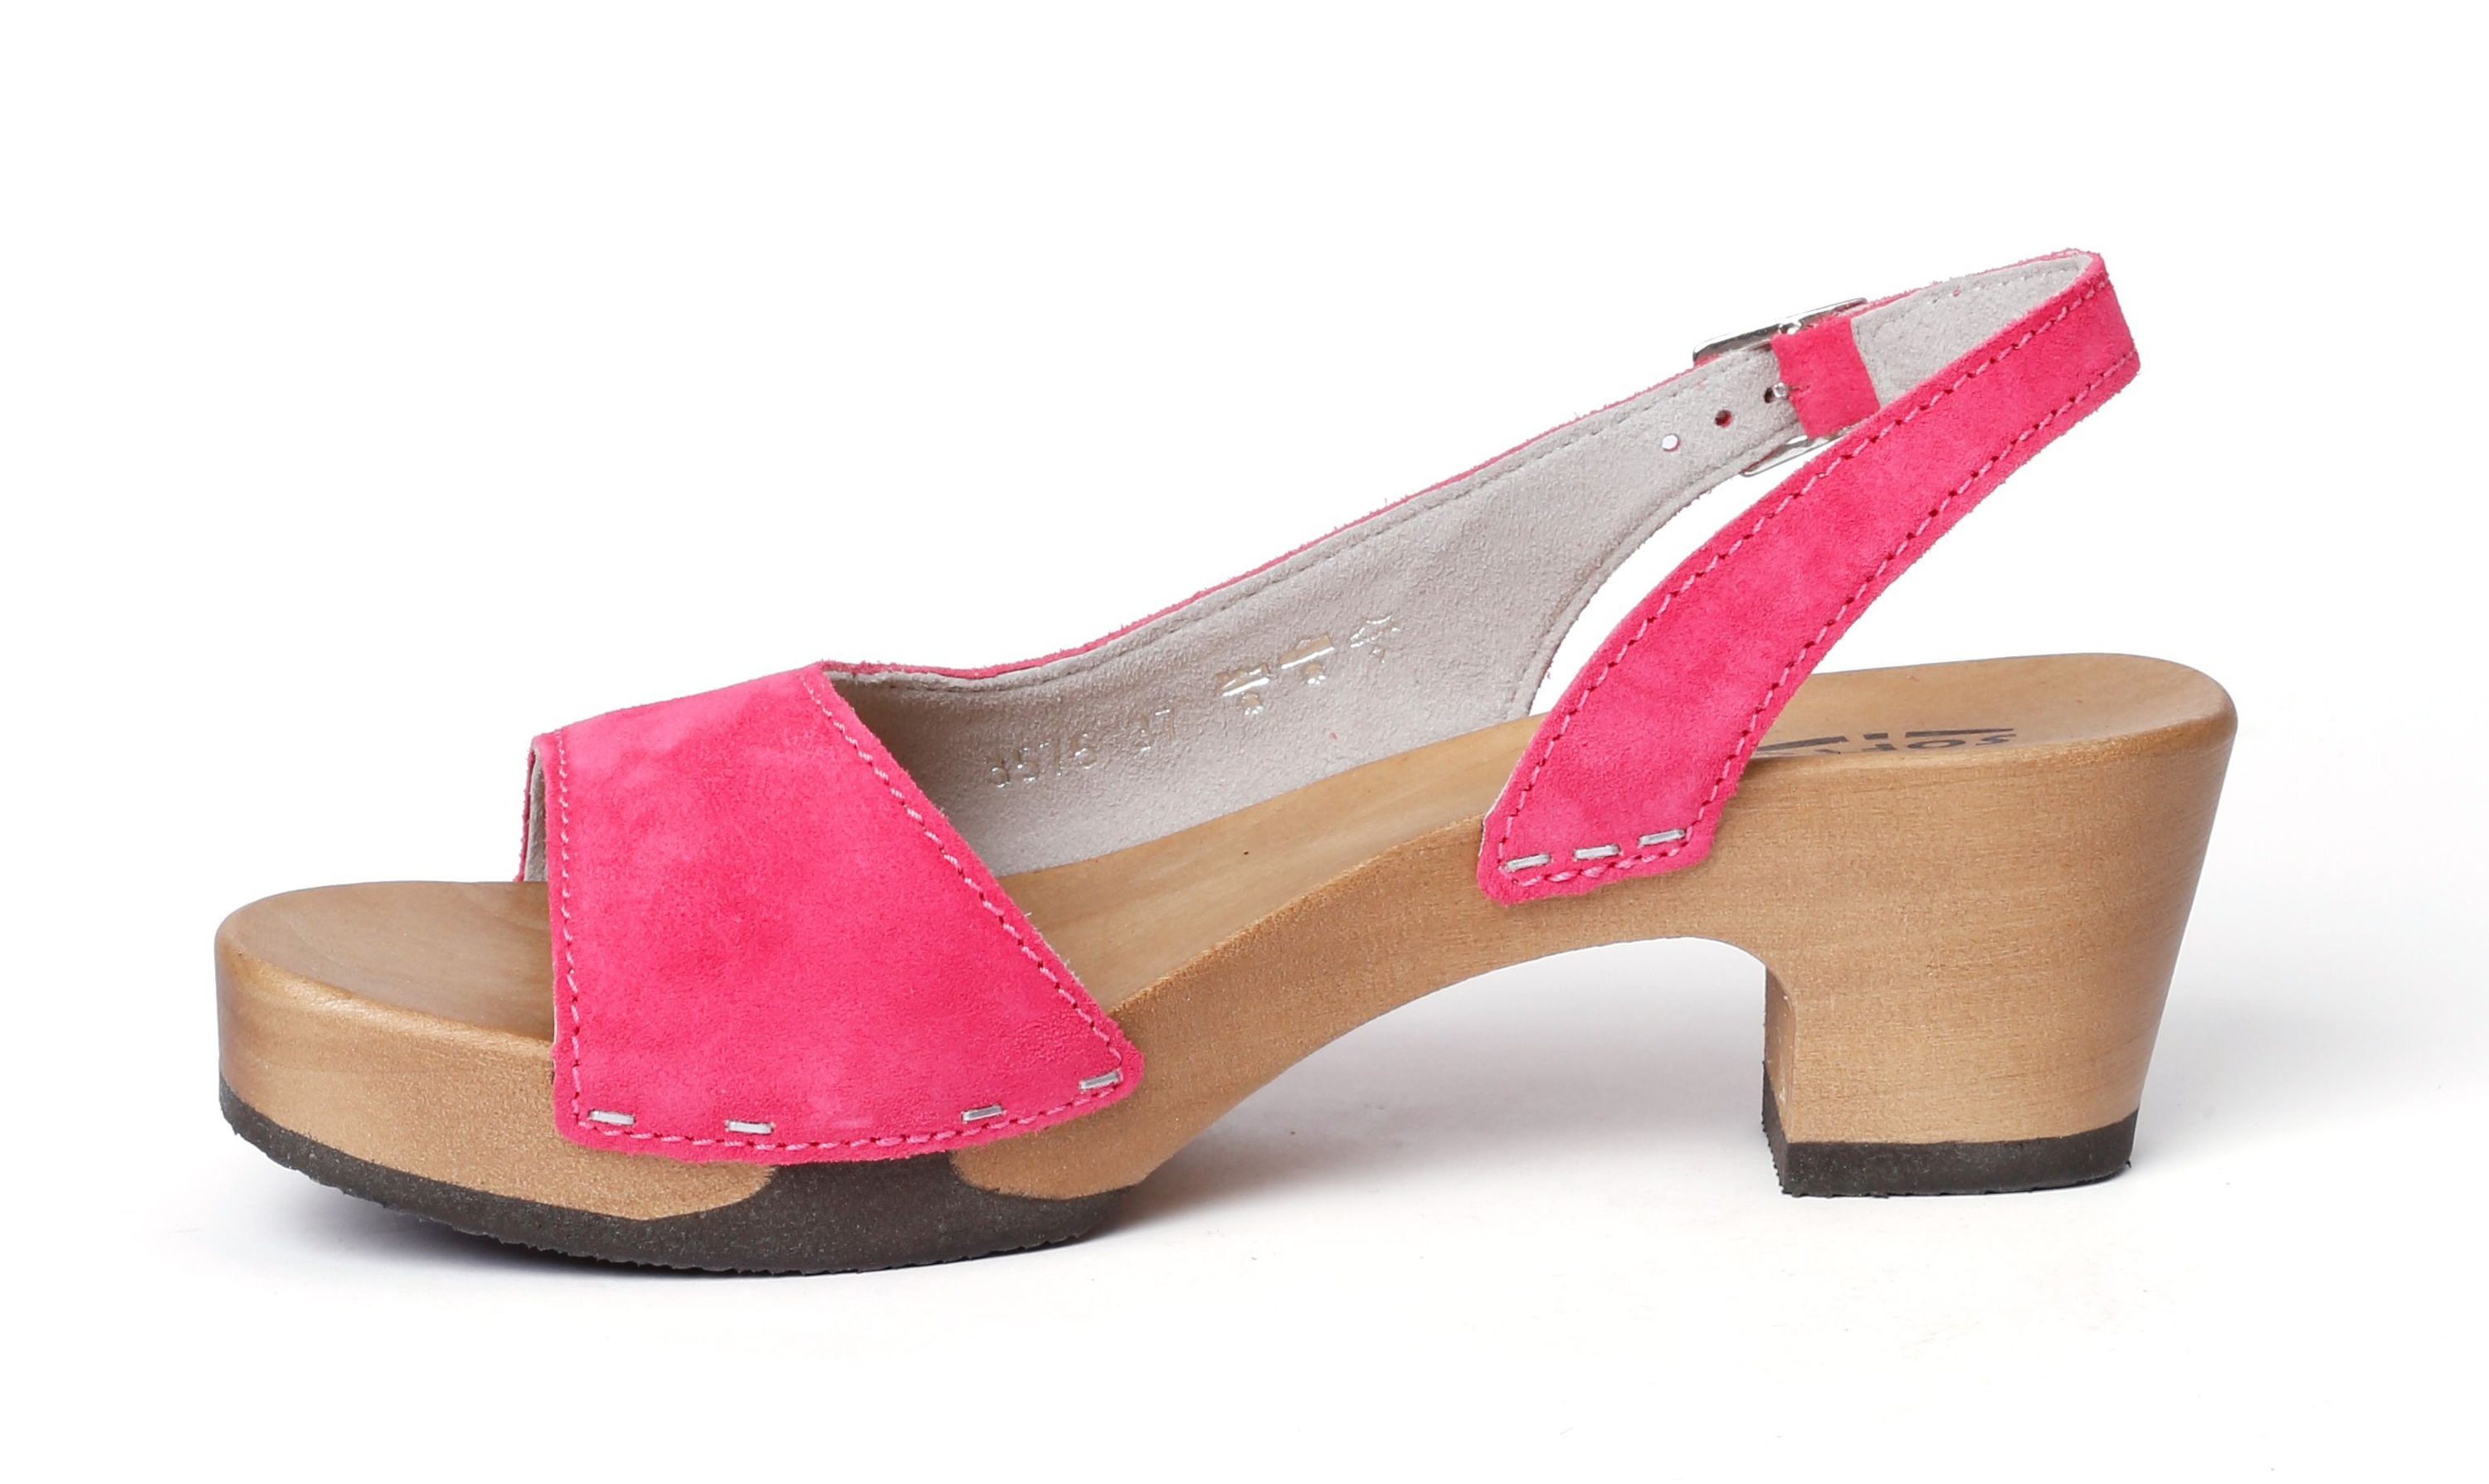 Sandals from poplar wood smooth suede in color pink kiss by Softclox